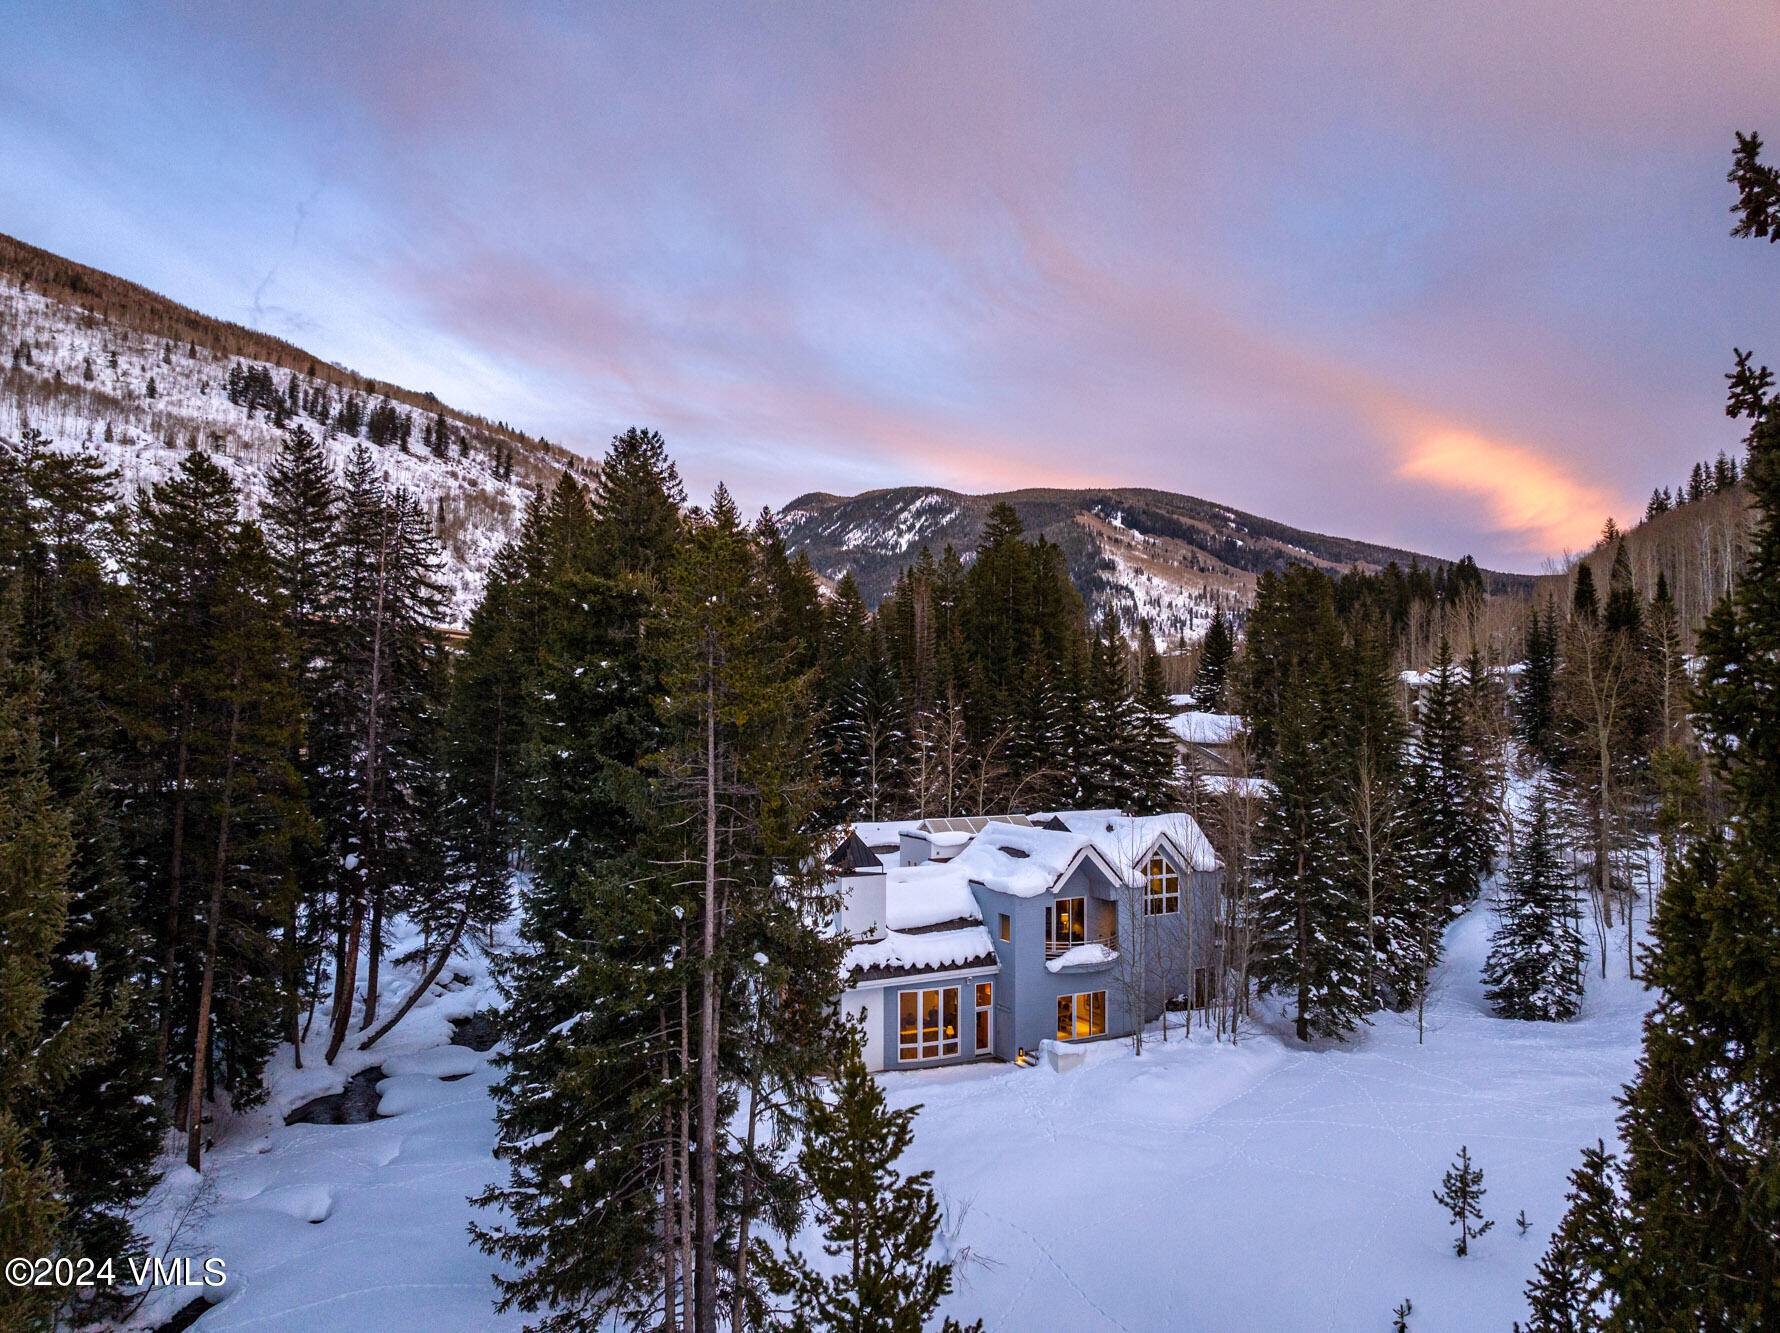 One of East Vail's most sought after locations, combining ease of access with picturesque surroundings.